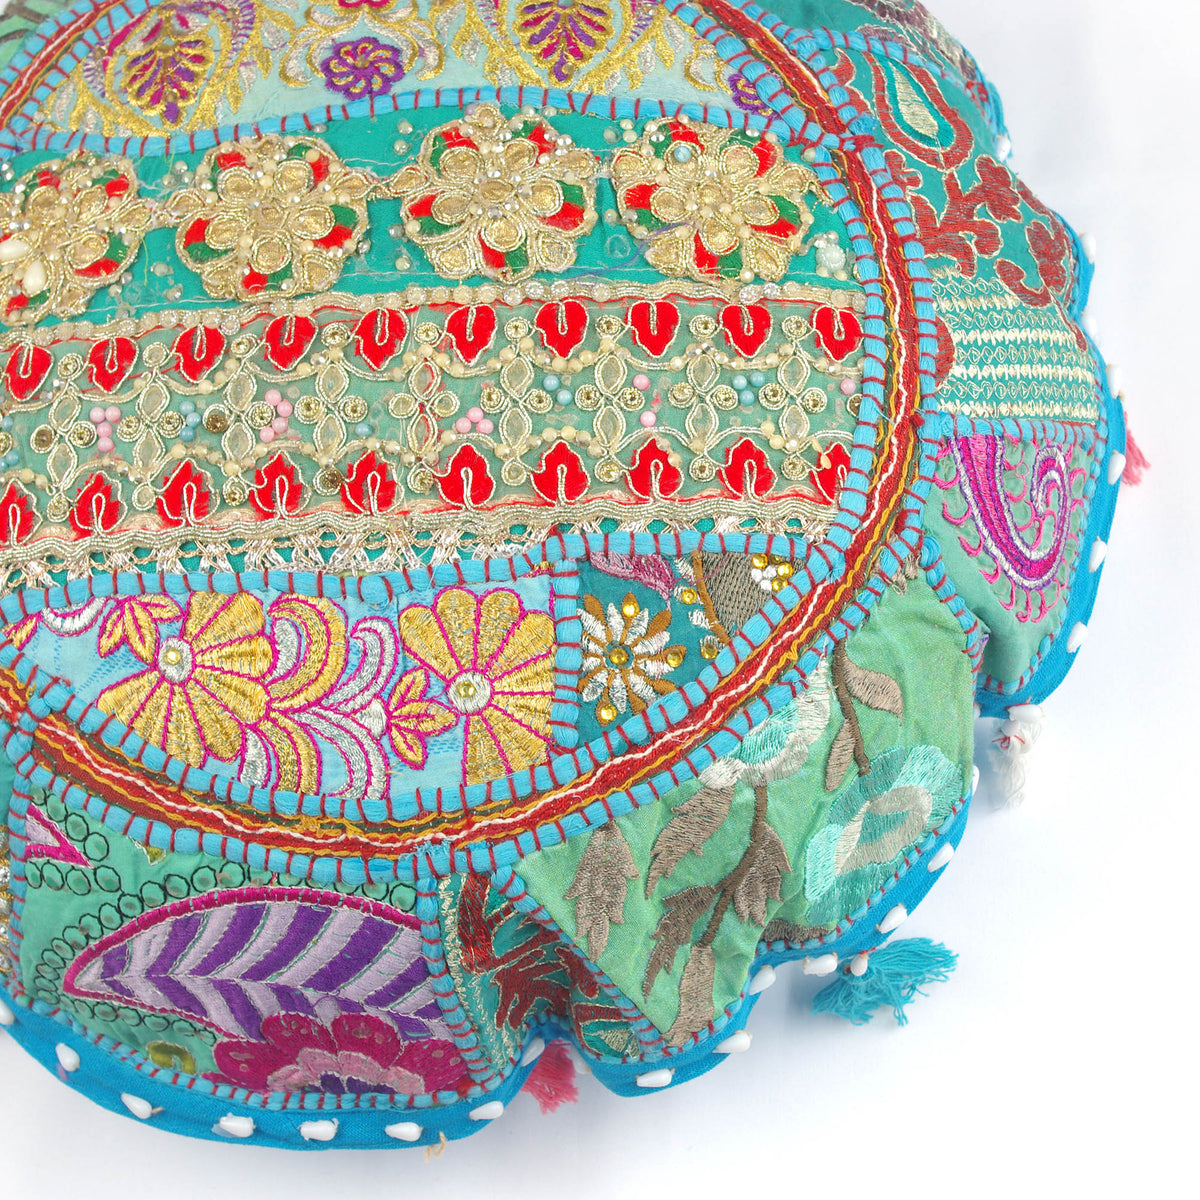 Sky Blue With Red Booti Round Floor Embroidered Patchwork Pouf Ottoman Indian Vintage Cushion Cover 18"